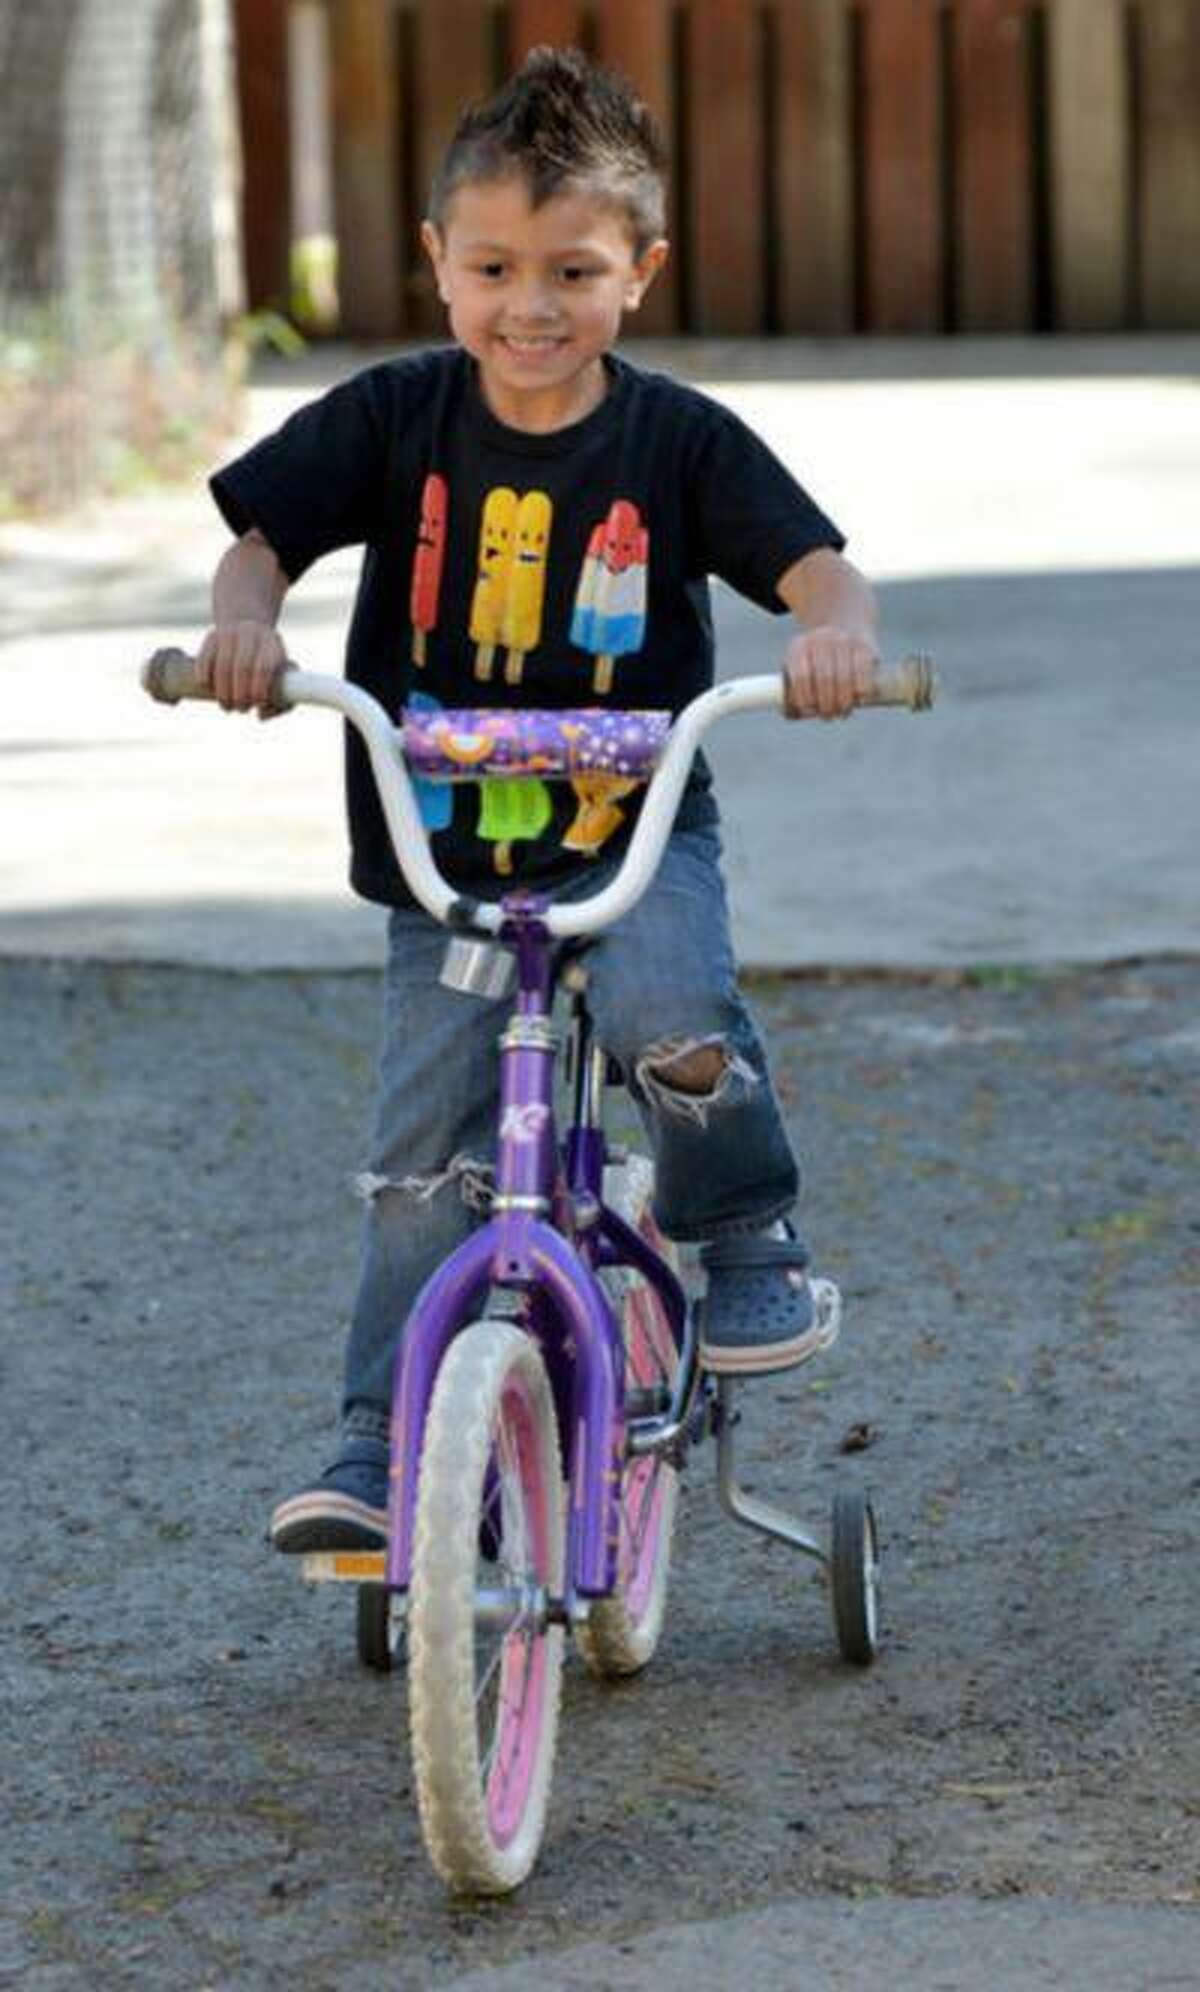 Julian Meija-Blagovic, 4, of Martinez, rides a pink and white bike that his parents bought for him at a garage sale in Martinez, Calif., on Saturday March 23, 2013. His parents, Jorge Meija and Lisa Blagovic, are trying to raise their kids with respect and balance of gender.